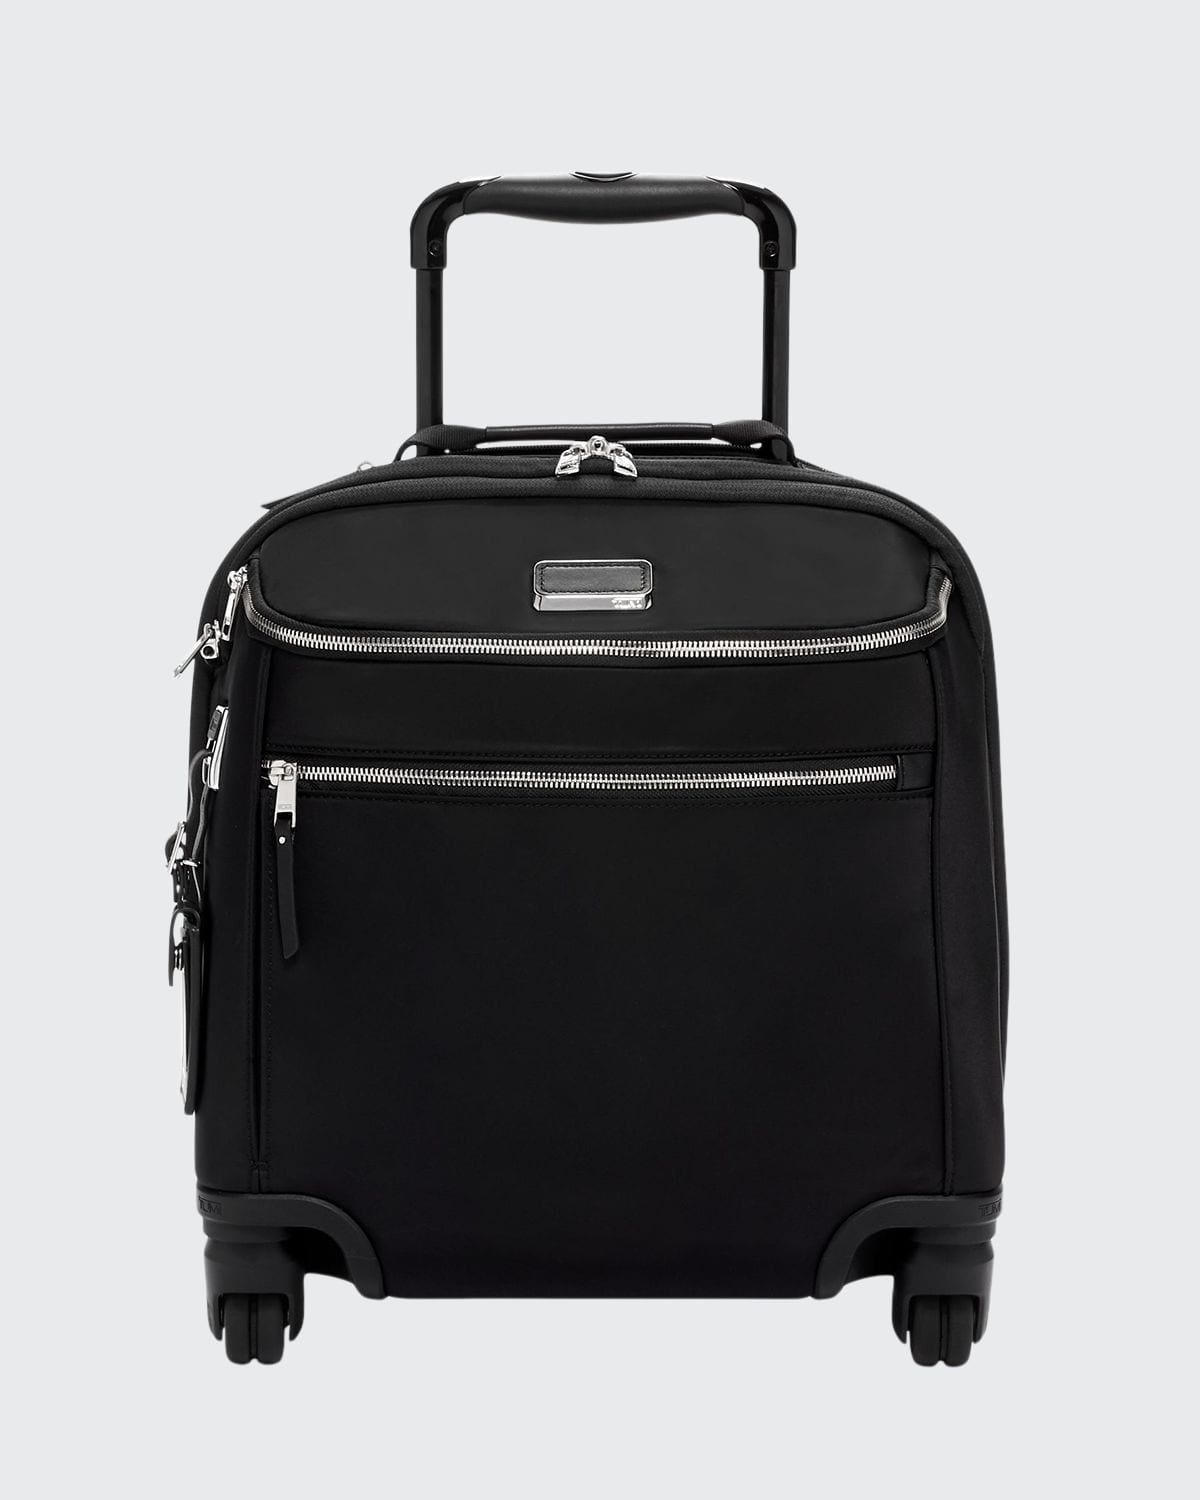 Oxford Compact Carry-On Luggage, Black/Silver